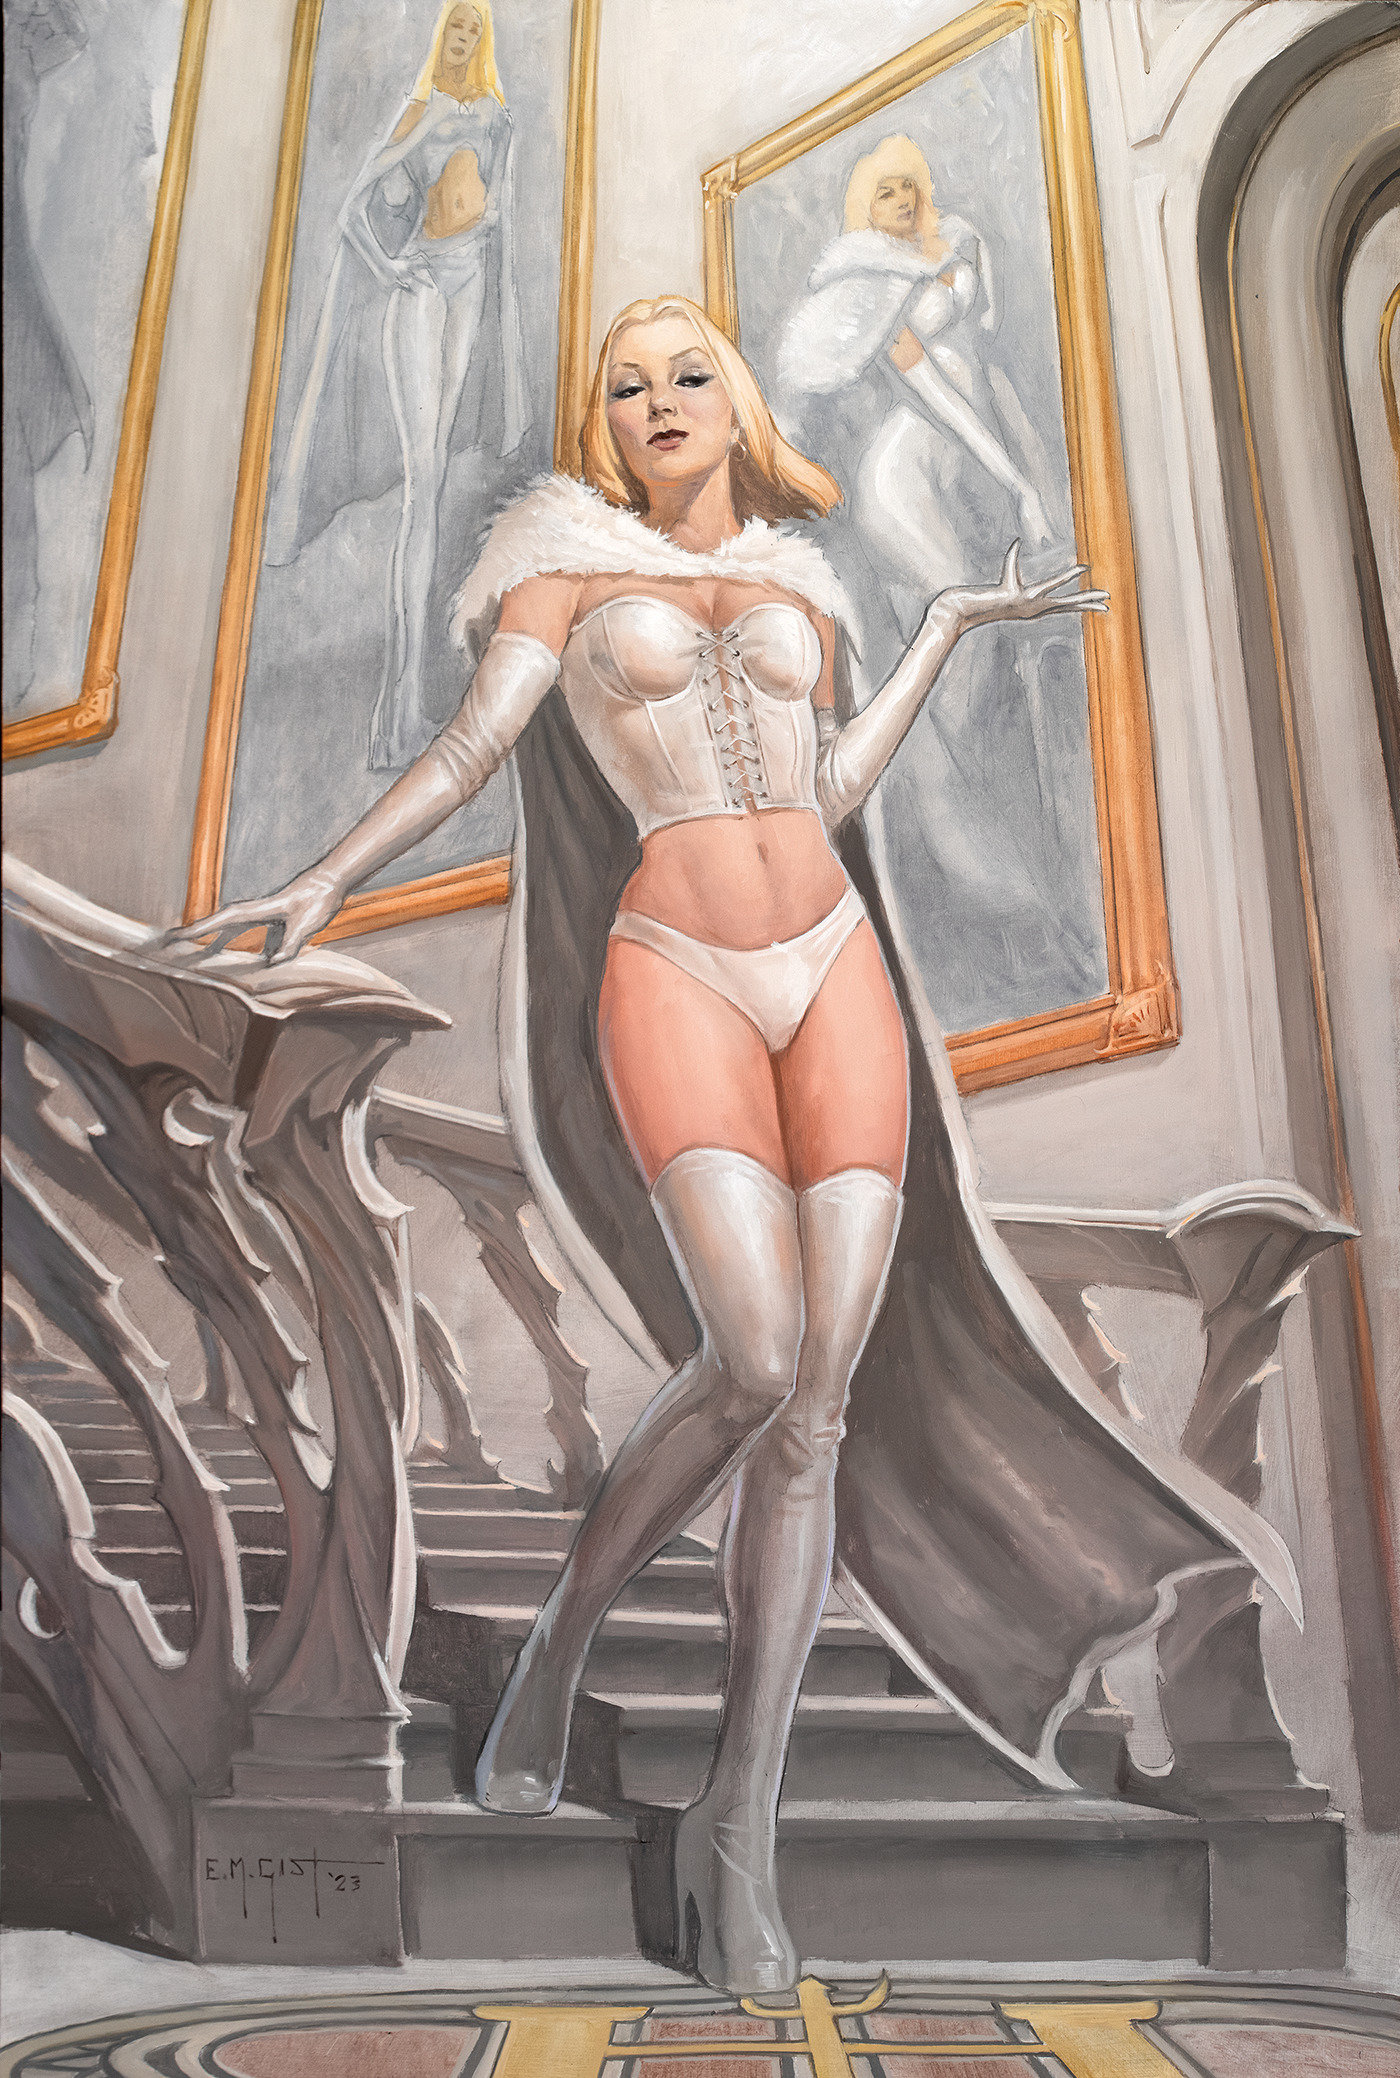 Fall of the House of X #4 E.M. Gist Emma Frost Virgin Variant (Fall of the House of X) 1 for 50 Incentive